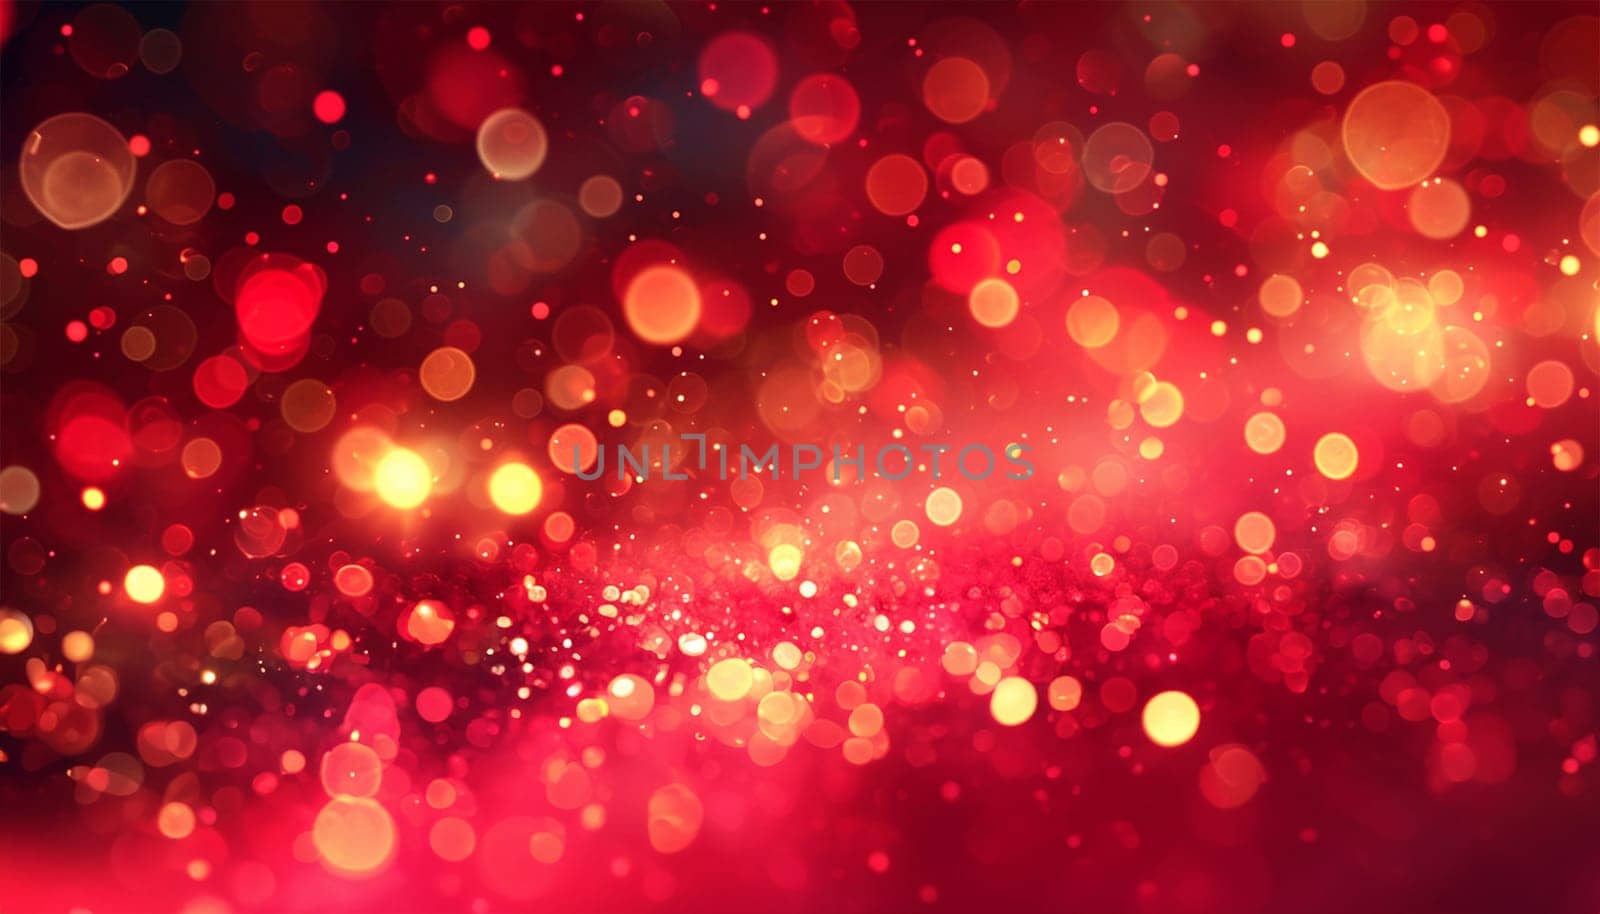 Gold and red particles waves glittering. Red sparkles glitter and rays lights bokeh abstract holiday background texture. Festive abstract design copy space